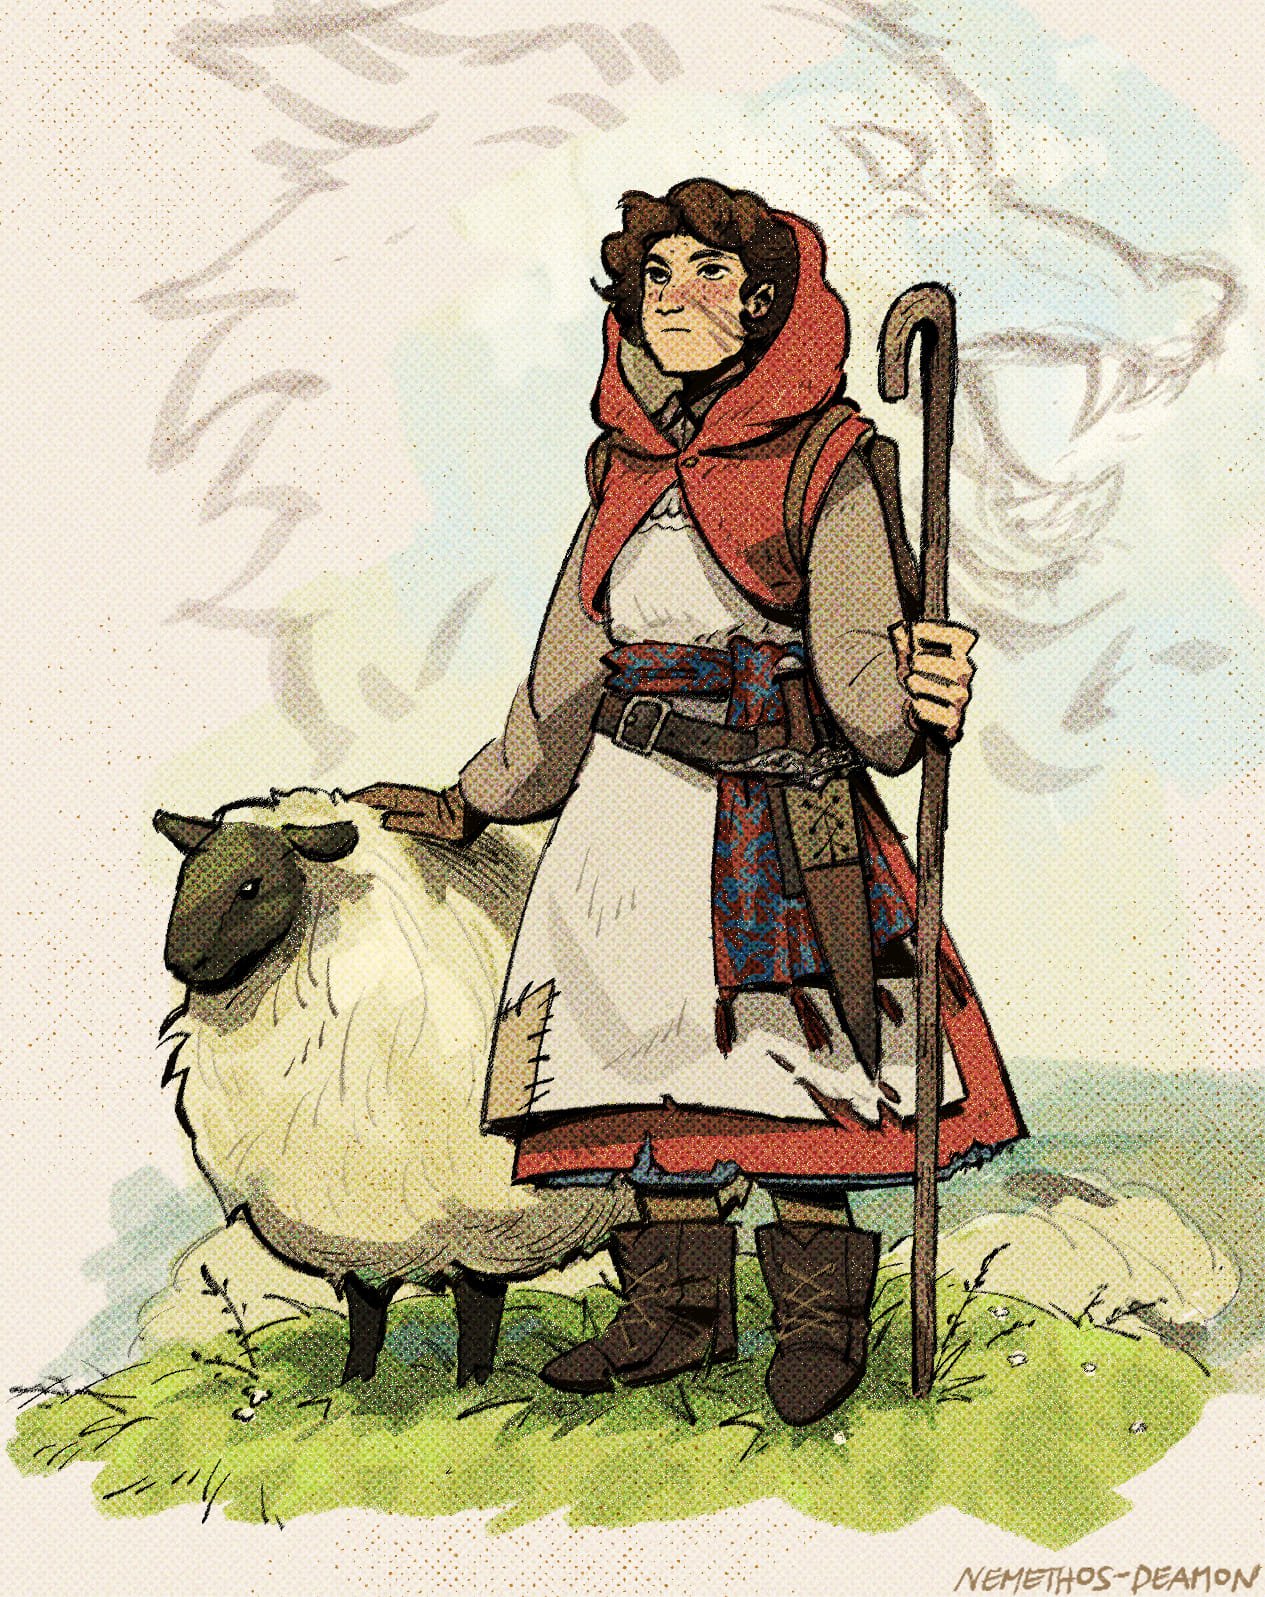 Submission by Gene Kuwago Deamon* ( fb.me/gene.deamon ) for the #CDChallenge - the theme for April 2024 was #TravelingShepherd⠀⠀⠀⠀⠀⁣⠀⁣⠀⠀⠀⁠⠀⁠⠀⁠⠀⁠⠀⁠⠀⁠⠀⁠⠀⁠⠀
.⠀⠀⠀⠀⠀⠀⁣⠀⁣⠀⠀⠀⁠⠀⁠⠀⁠⠀⁠⠀⁠⠀⁠⠀⁠⠀⁠⠀
.⠀⠀⠀⠀⠀⠀⁣⠀⁣⠀⠀⠀⁠⠀⁠⠀⁠⠀⁠⠀⁠⠀⁠⠀⁠⠀⁠⠀
.⠀⠀⠀⠀⠀⠀⁣⠀⁣⠀⠀⠀⁠⠀⁠⠀⁠⠀⁠⠀⁠⠀⁠⠀⁠⠀⁠⠀
Presen